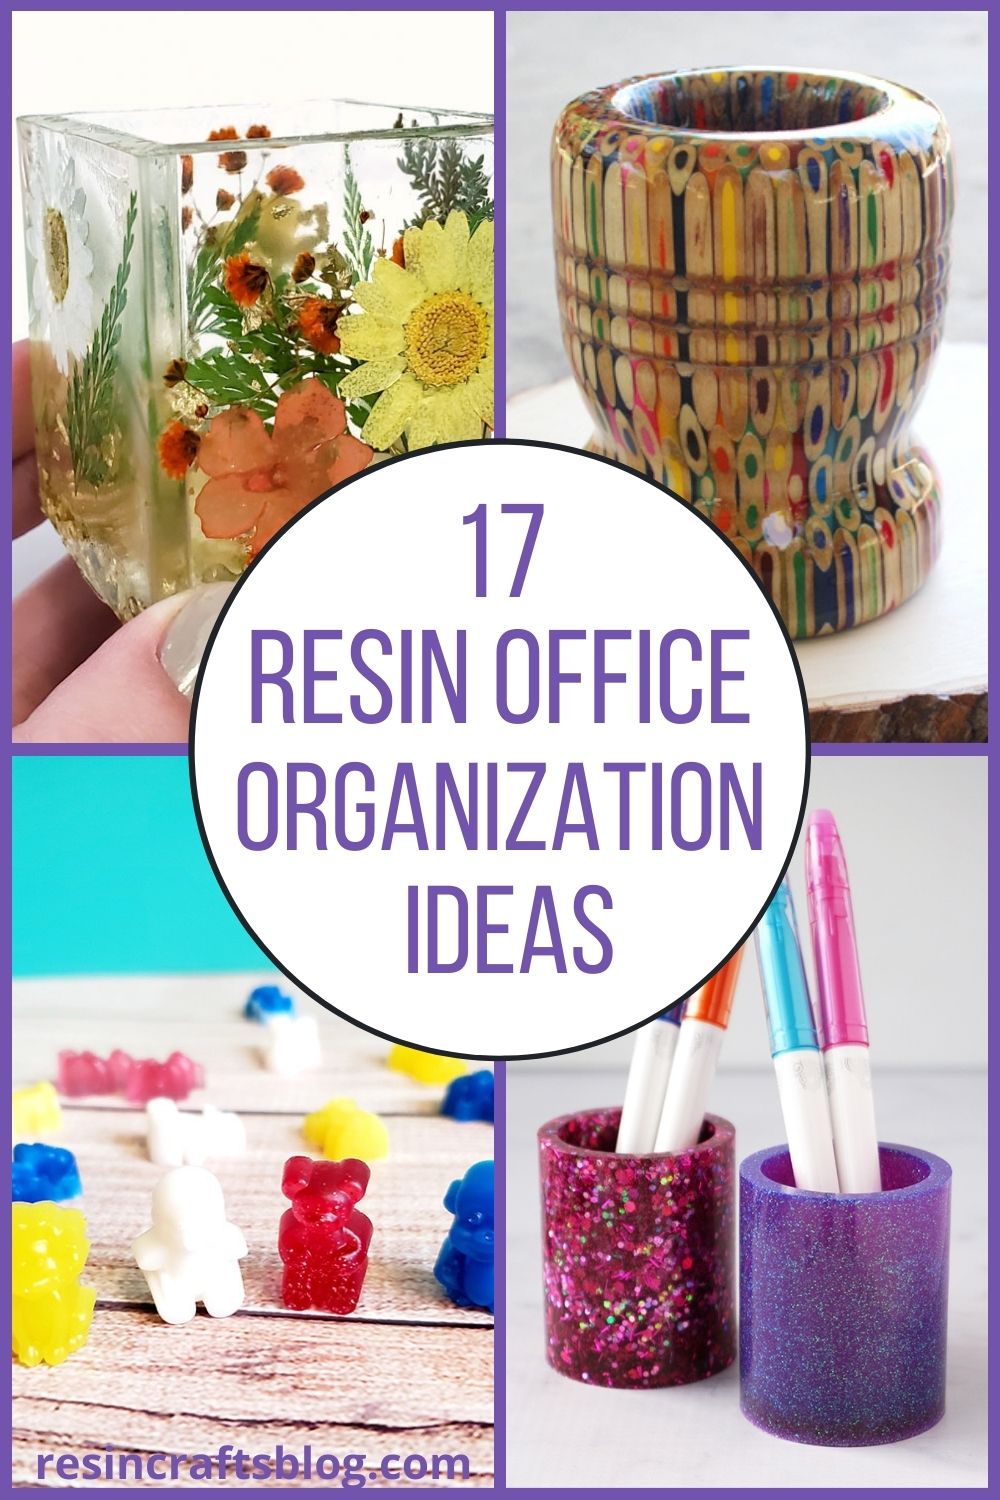 Check out these creative organization ideas with resin that will help add some personality to your office and get it organized in no time! #resincraftsblog #organizationideaswithresin #resinofficeprojects via @resincraftsblog